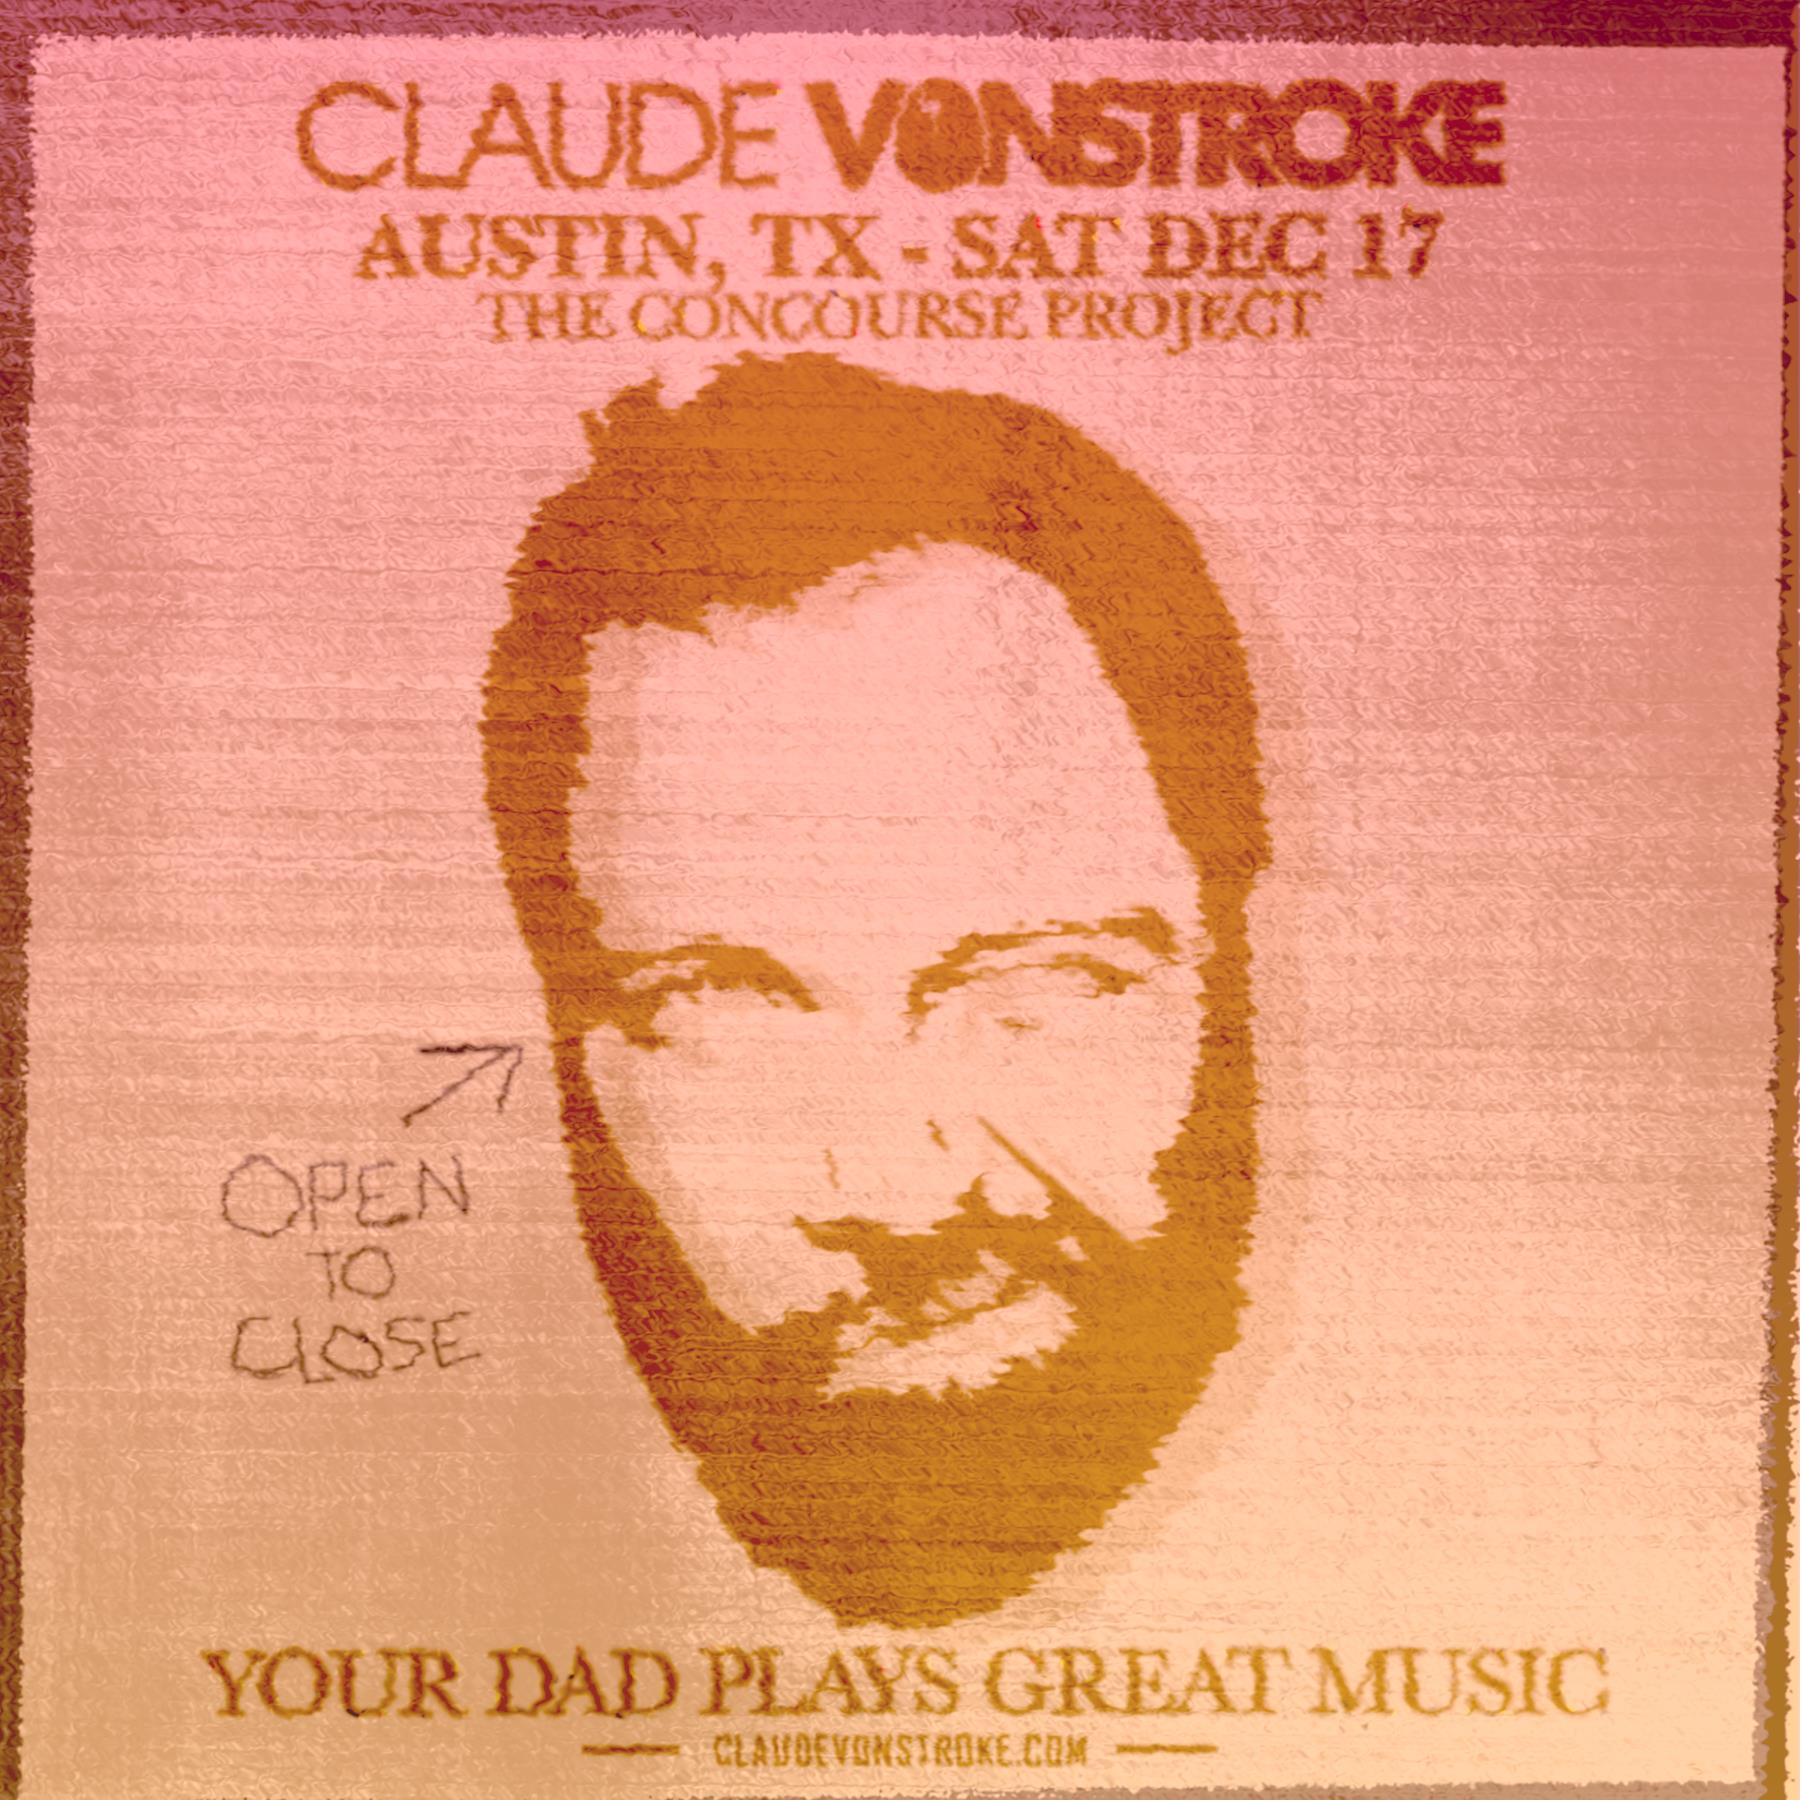 Claude VonStroke (Open to Close) at The Concourse Project